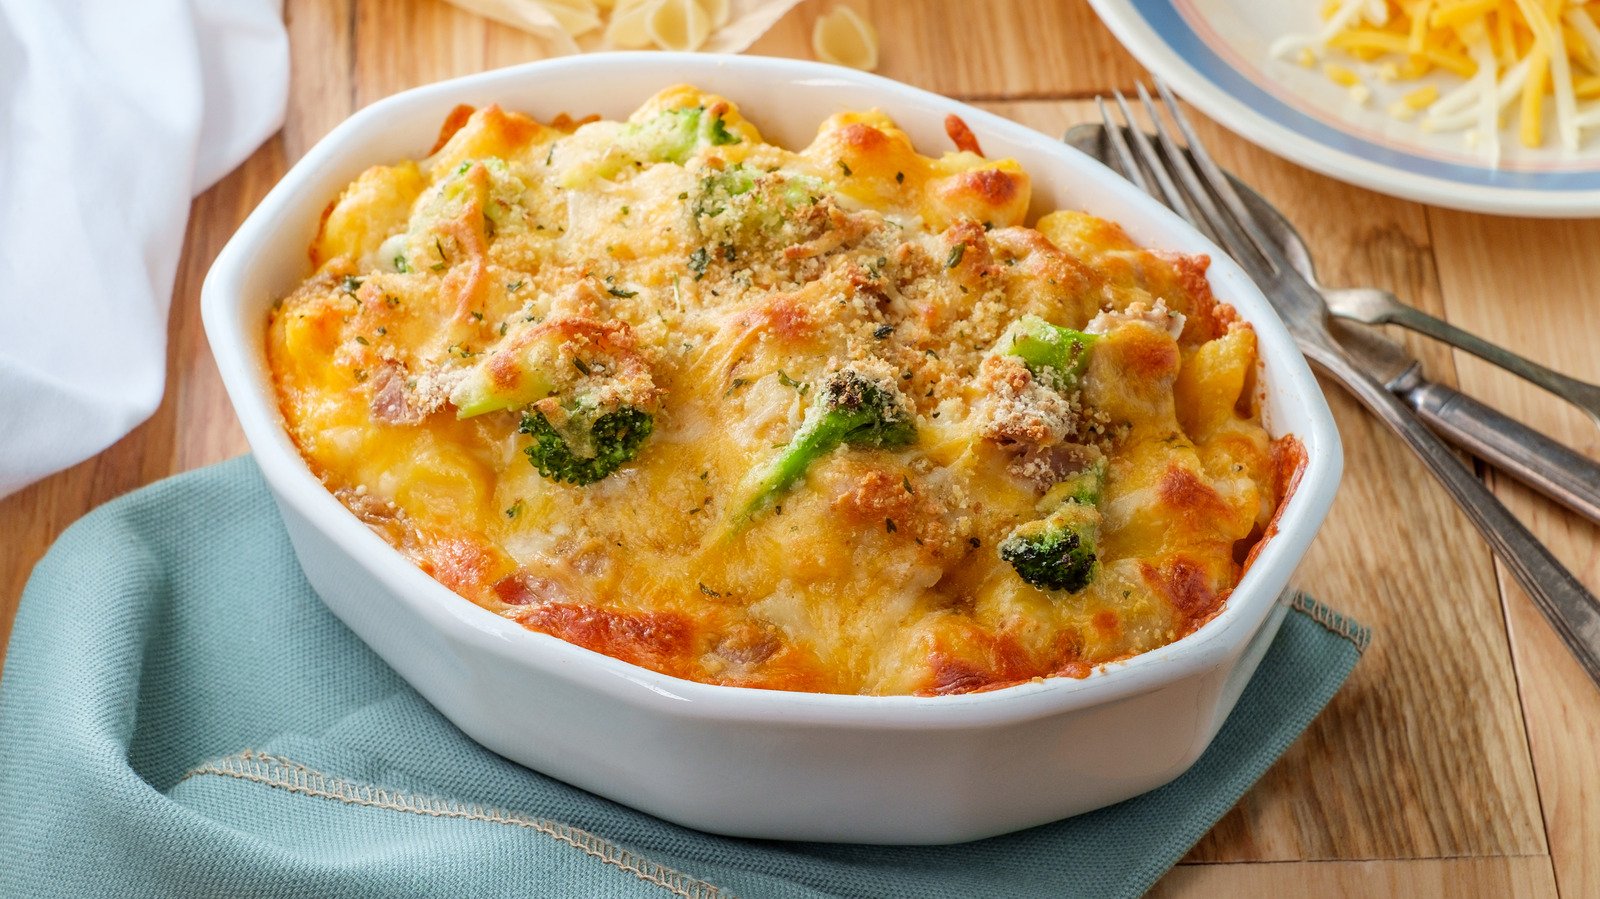 Every Casserole Needs These 5 Basic Ingredients